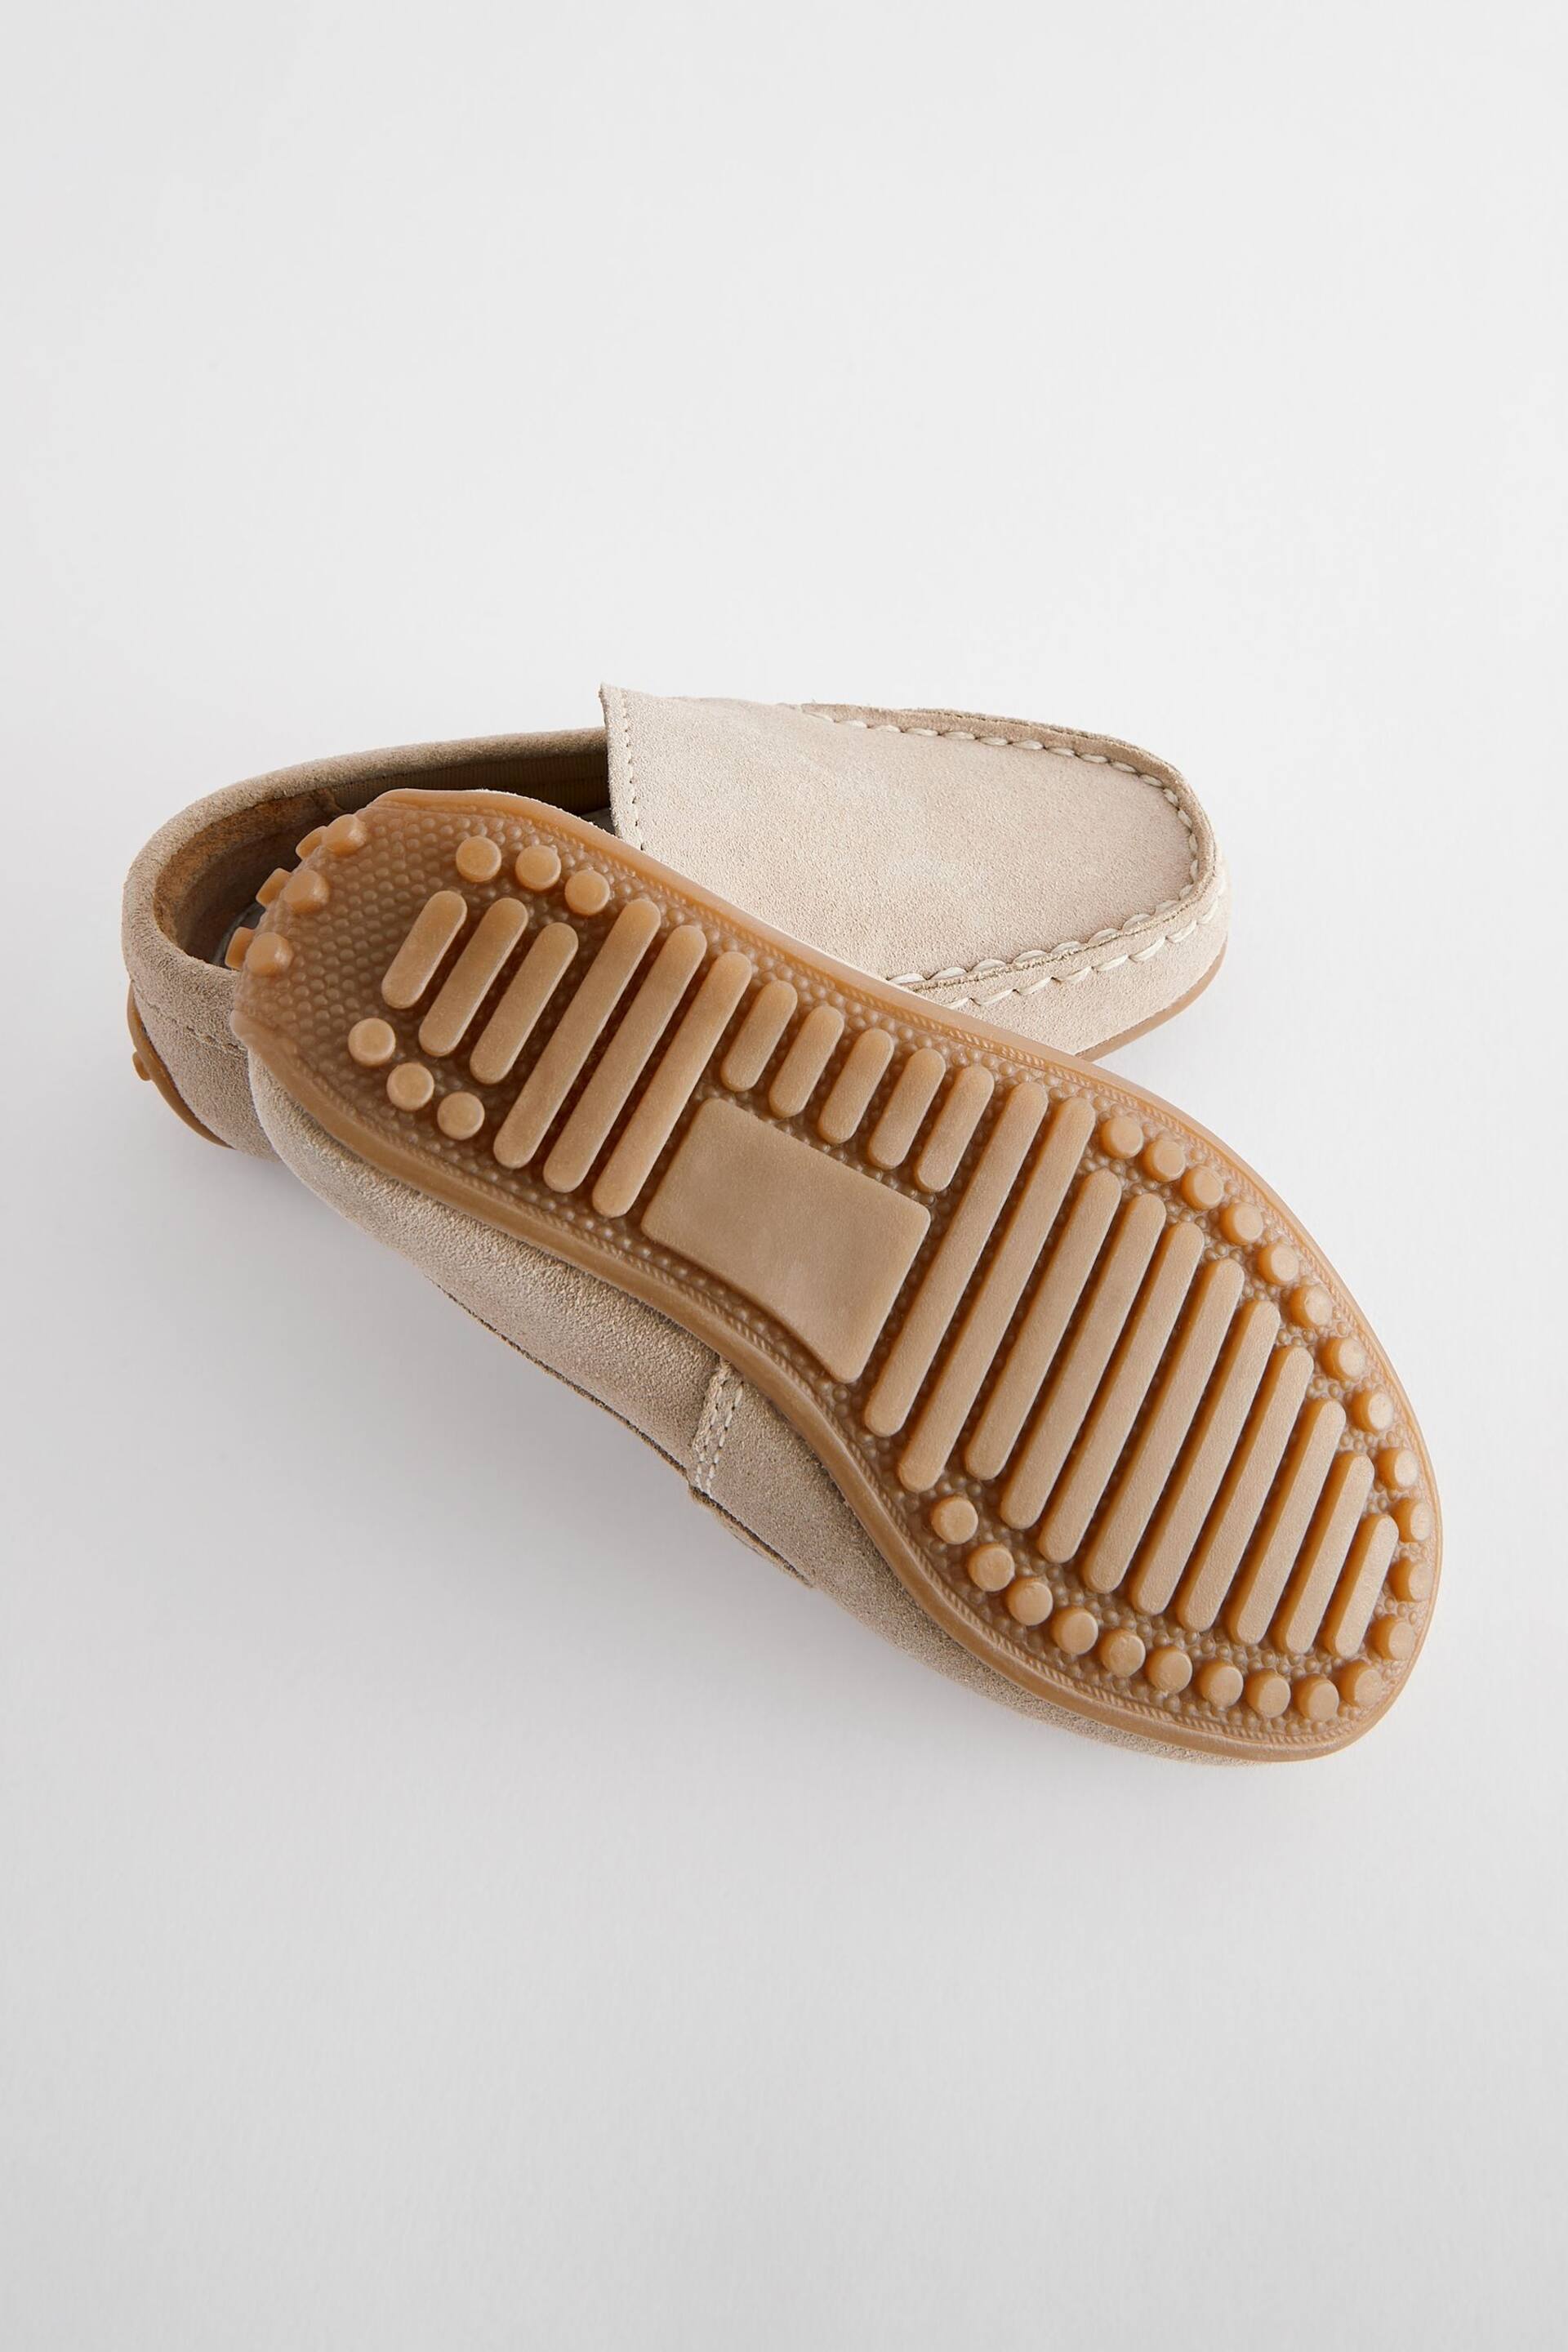 Natural Stone Driver Shoes - Image 5 of 5